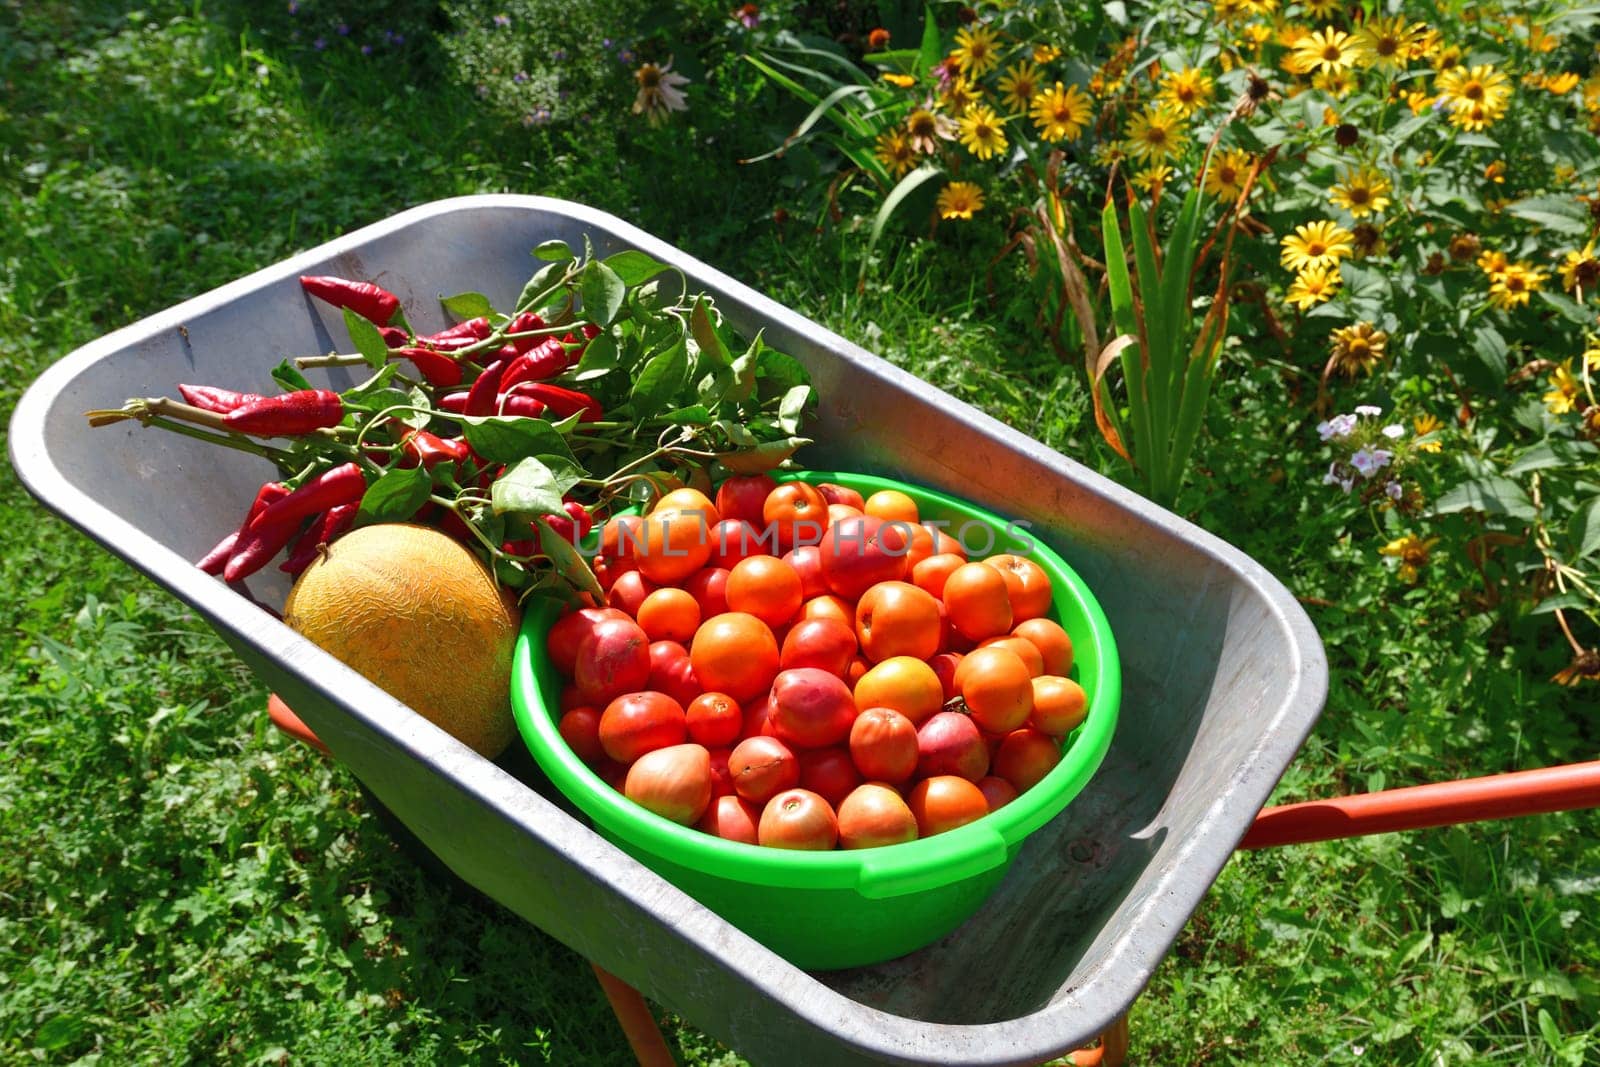 Wheelbarrow with tomatoes, peppers and melon grown in the garden by olgavolodina